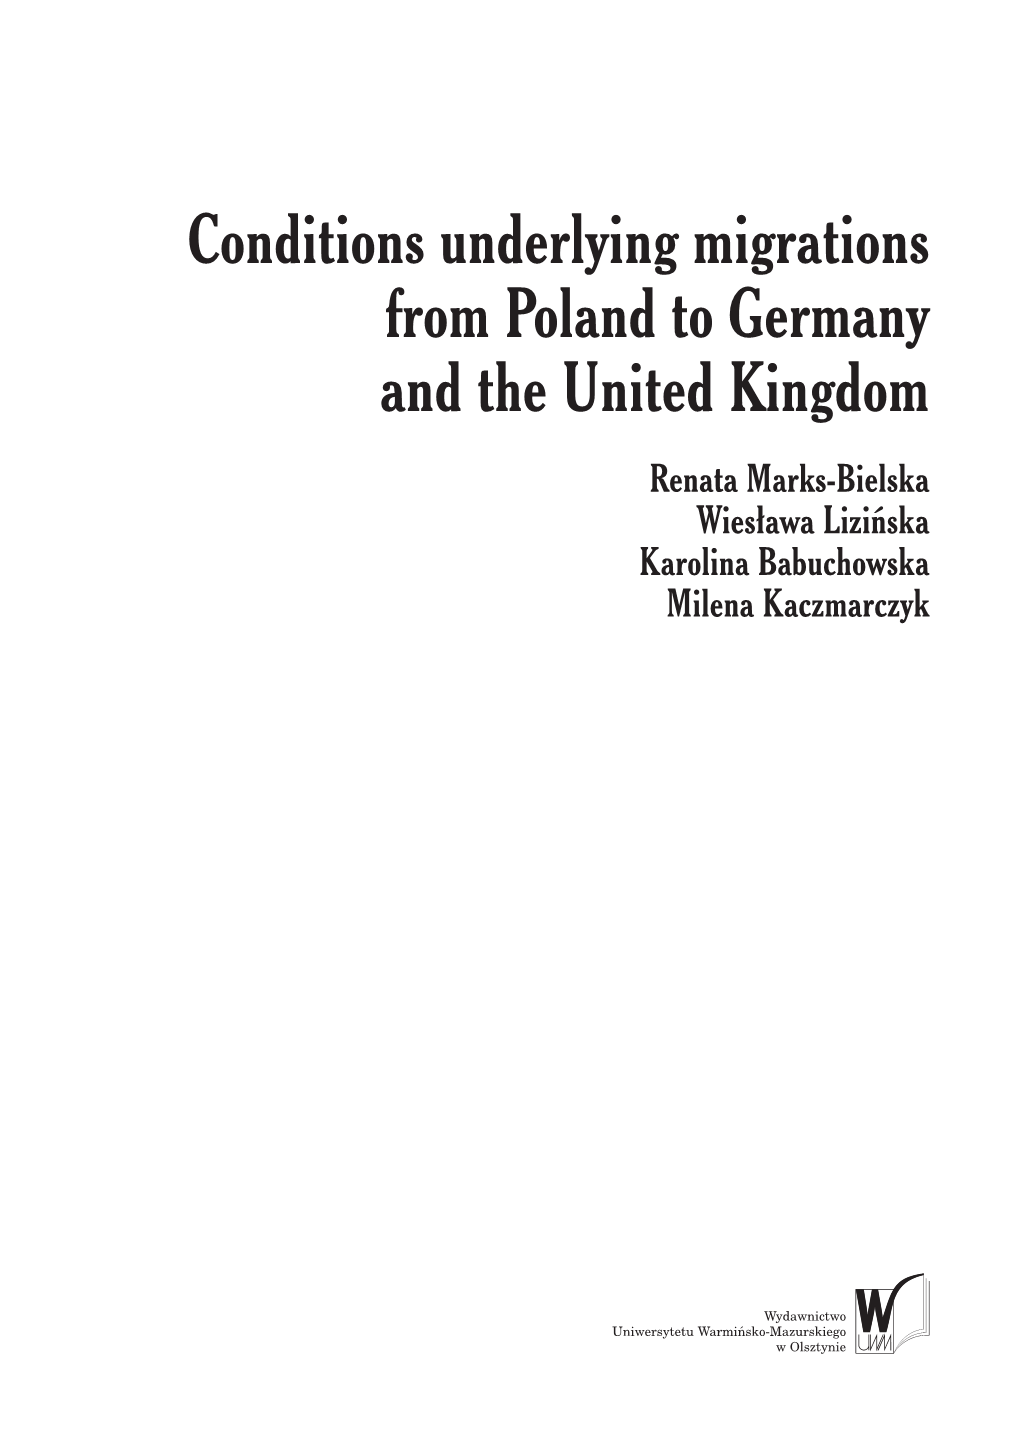 Conditions Underlying Migrations from Poland to Germany and the United Kingdom